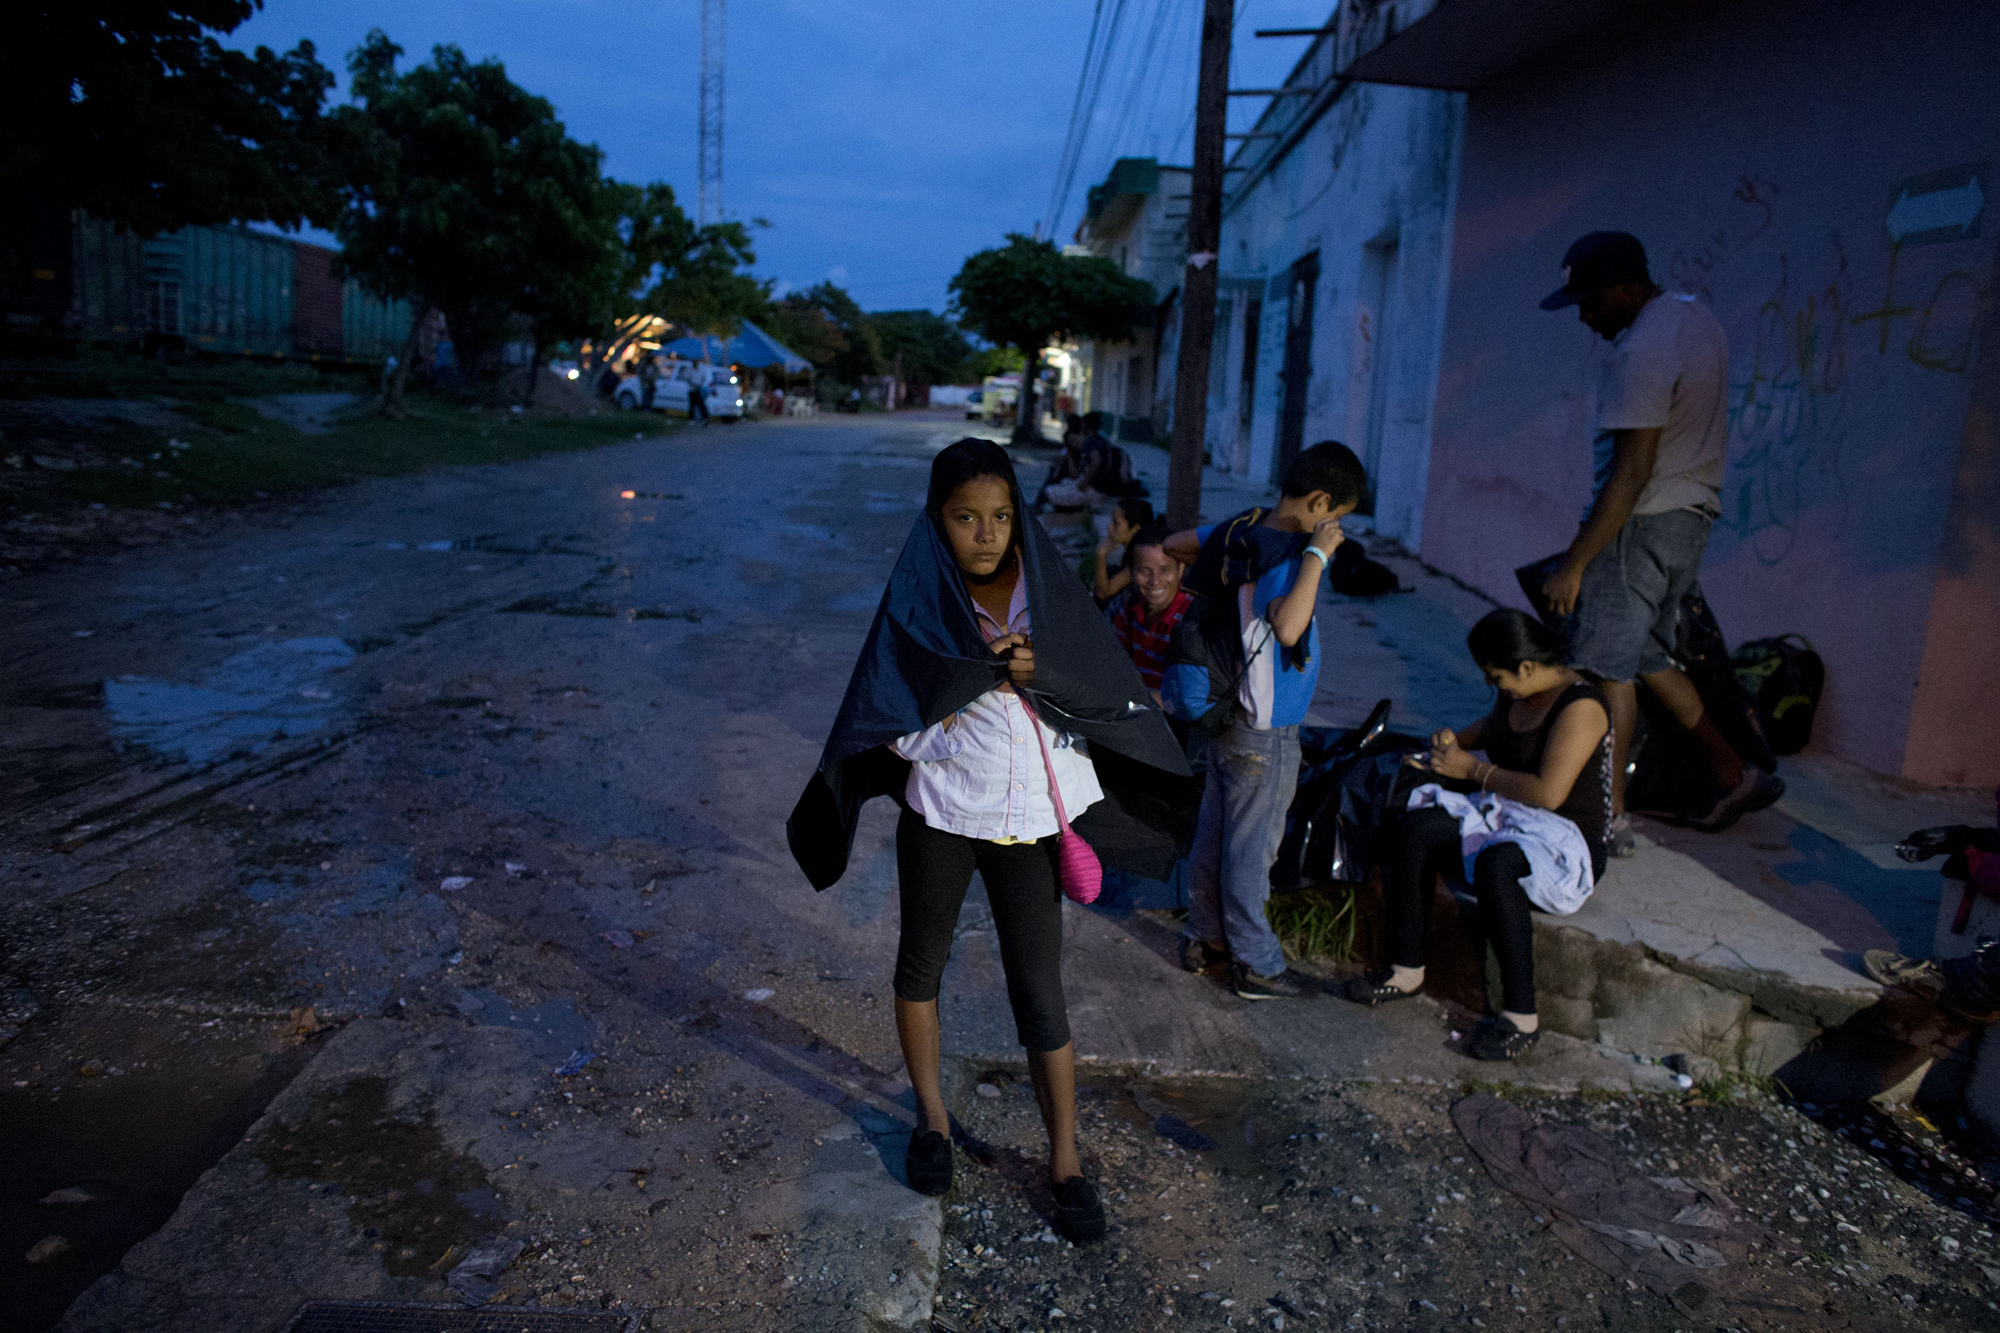 Cynthia Lemus, 12, waits with her family and other Central American migrants, for the arrival of a northbound freight train, in Arriaga, Mexico, June 19.